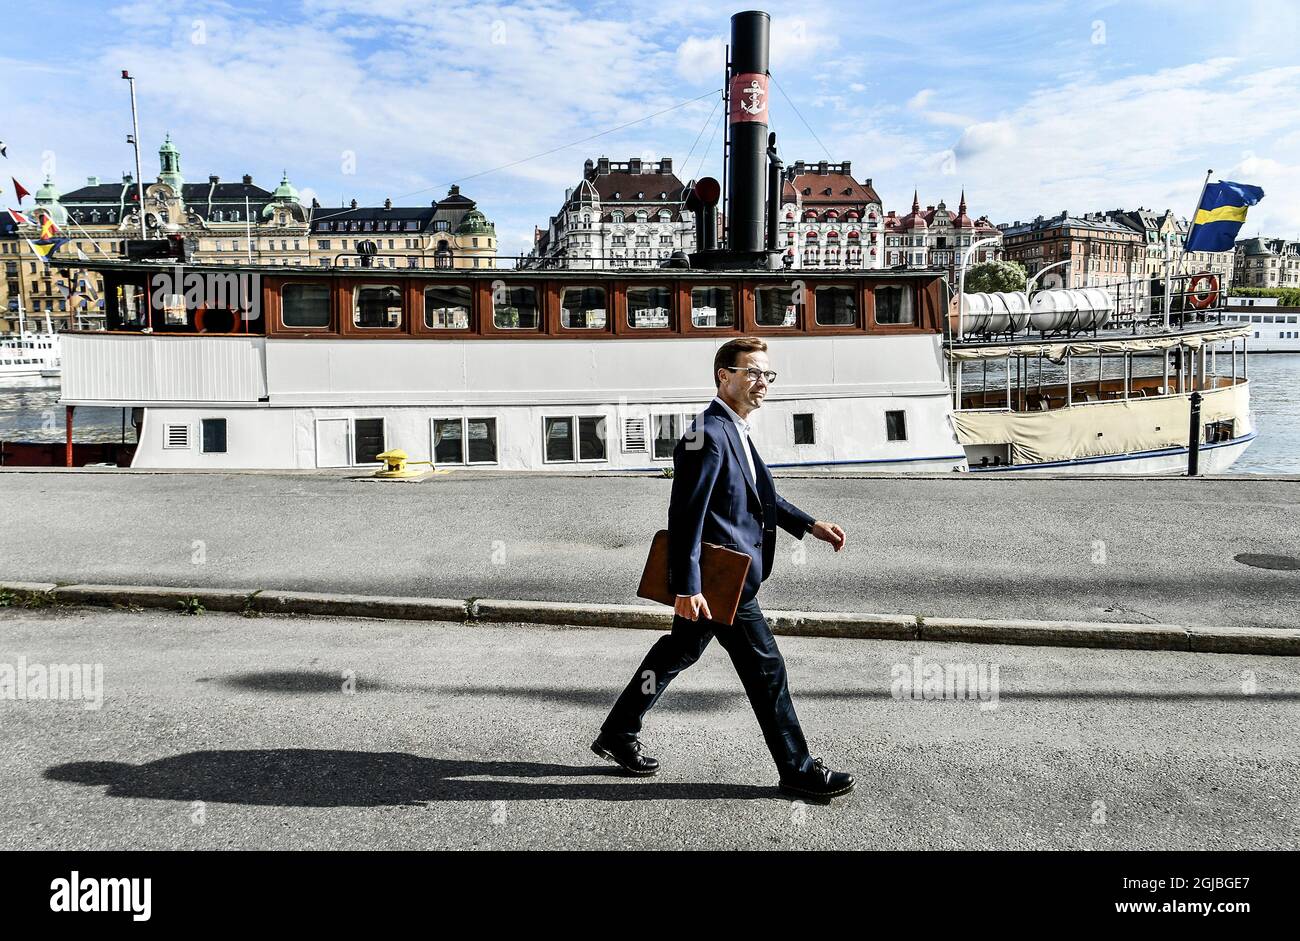 STOCKHOLM 2018-08-23 Ulf Kristersson, Chair of the Moderat party during an interview before the Swedish general elections September 9, 2018 Foto: Tomas Oneborg / SvD / TT / Kod: 30142 ** OUT SWEDEN**  Stock Photo